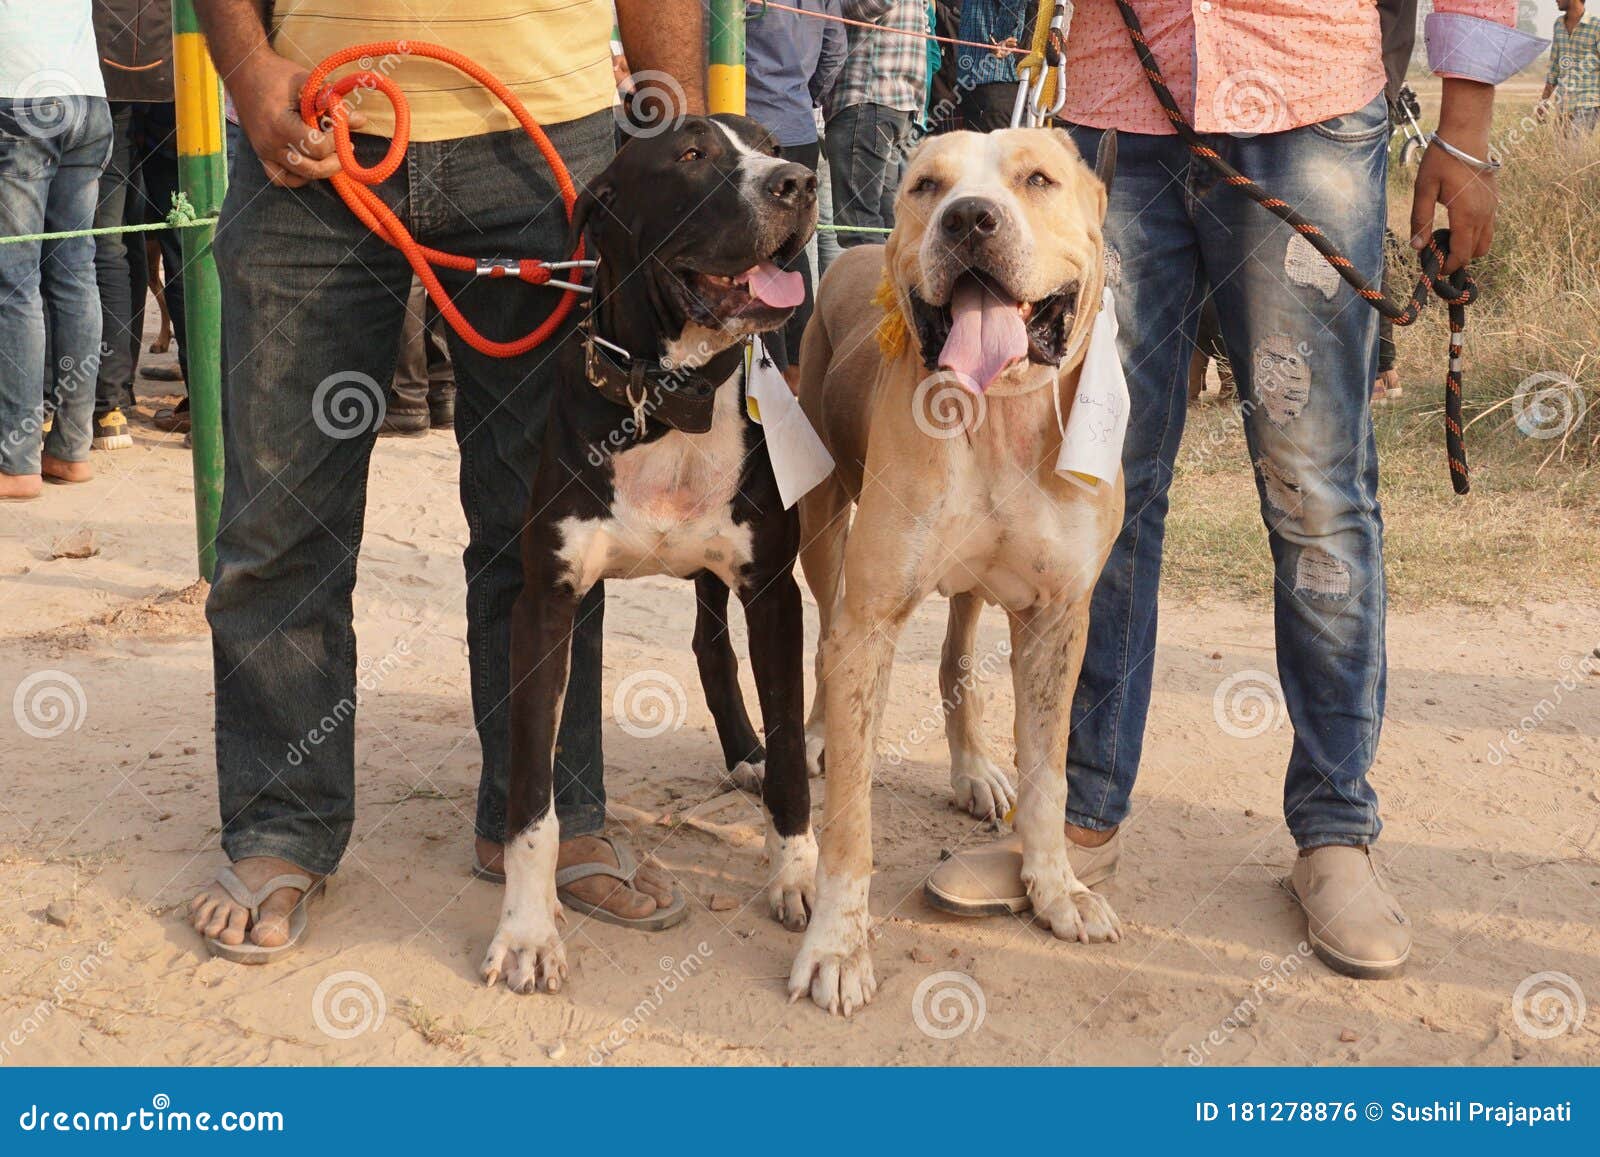 Rare Pakistani Bully Dogs During A Dog Show Editorial Photo Image Of White Rare 181278876